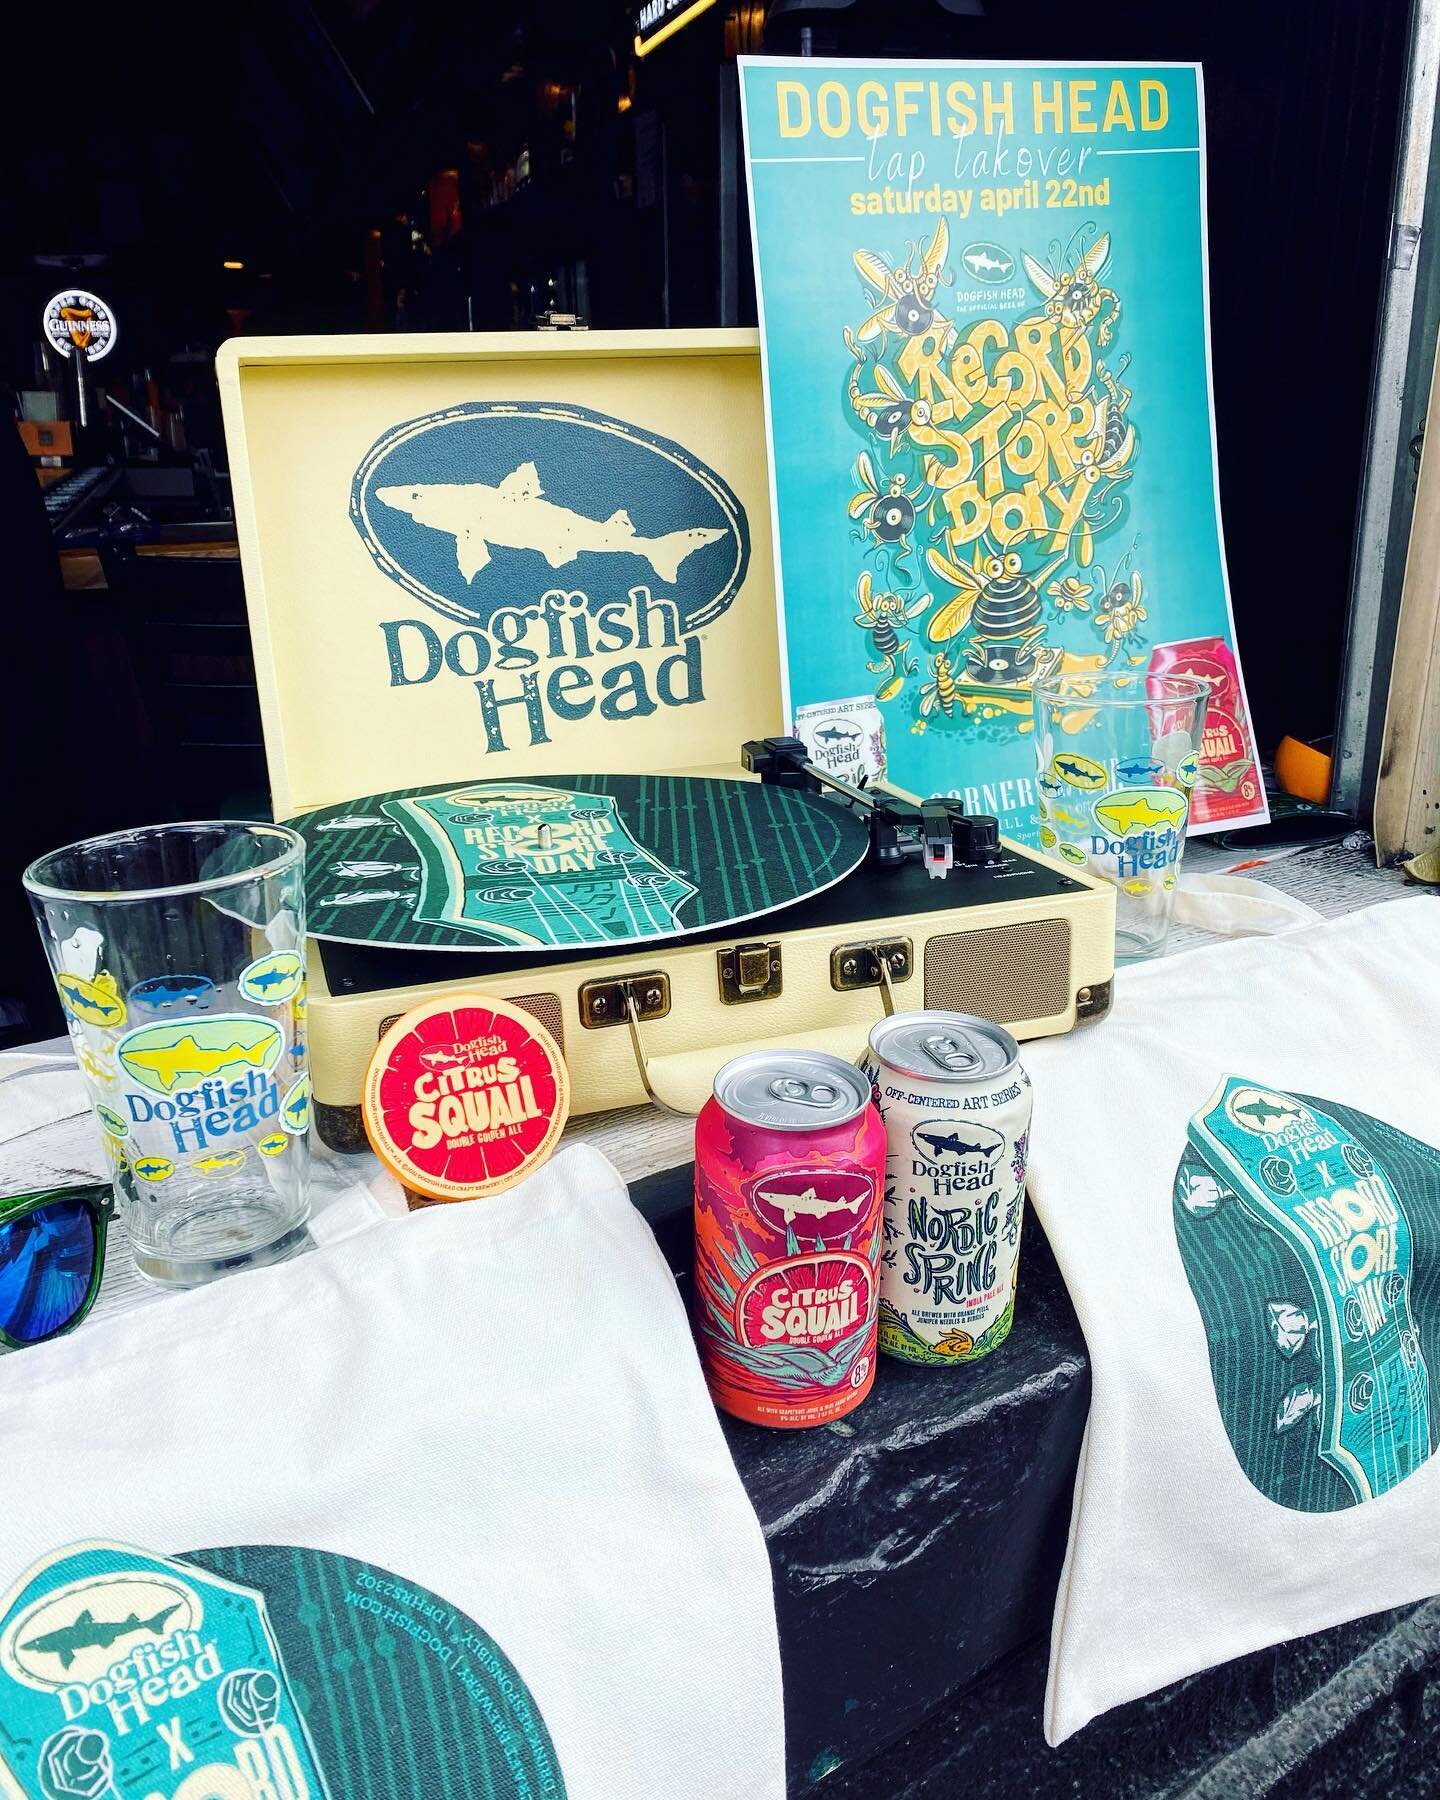 Win this custom Dogfish Head record player!🎵🤗 
Saturday 5-7pm, come join our @dogfishhead tap takeover to celebrate Record Store Day!

*keep the pint glass w first purchase while supplies last*